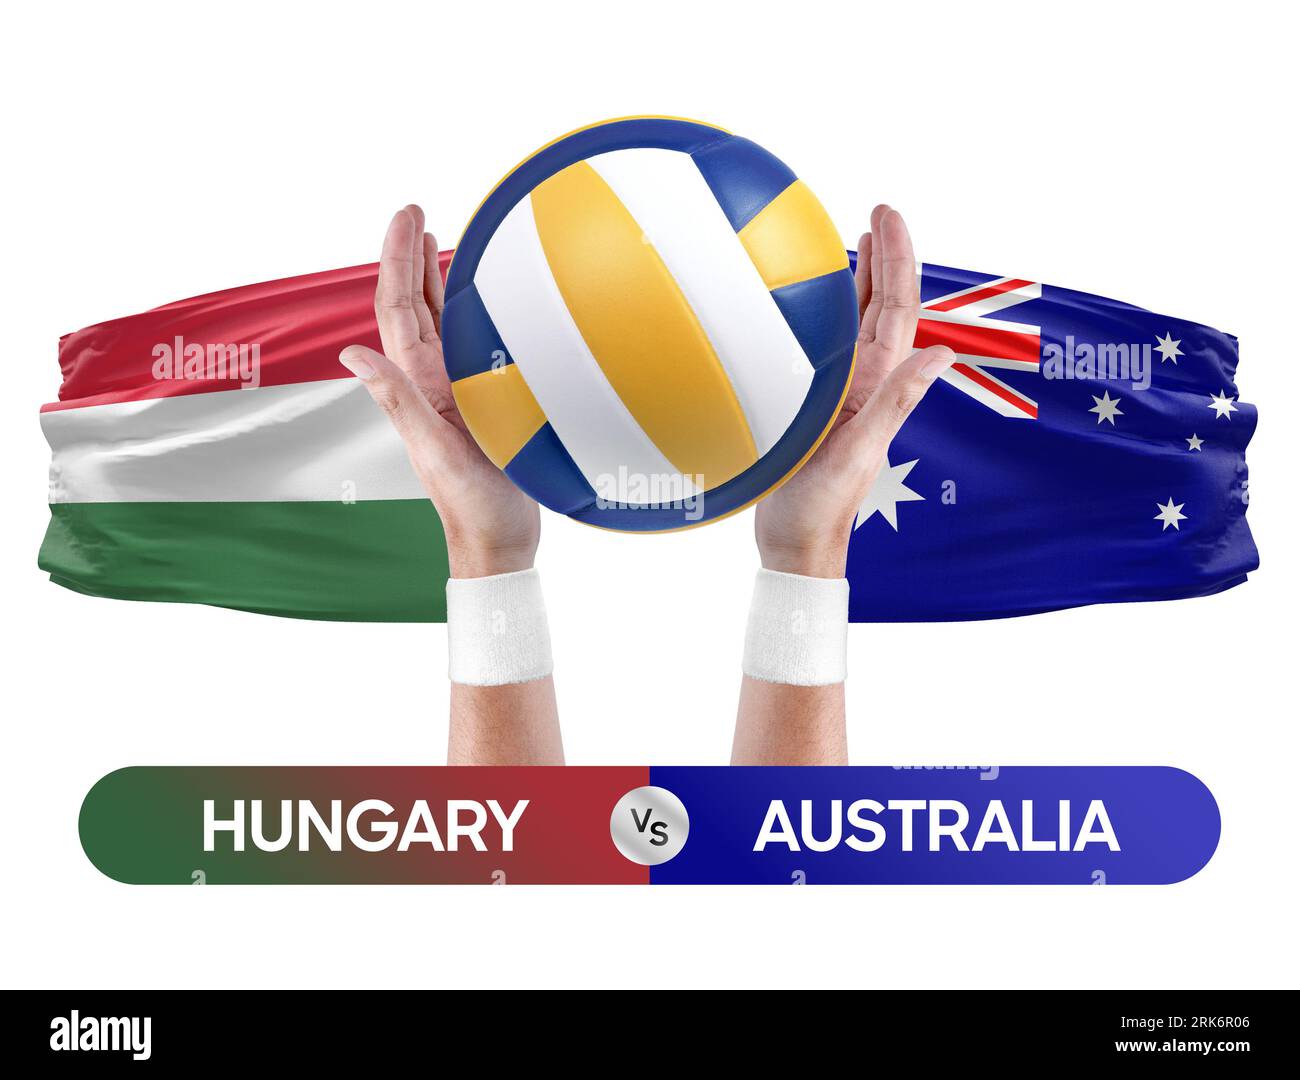 Hungary vs Australia national teams volleyball volley ball match competition concept. Stock Photo